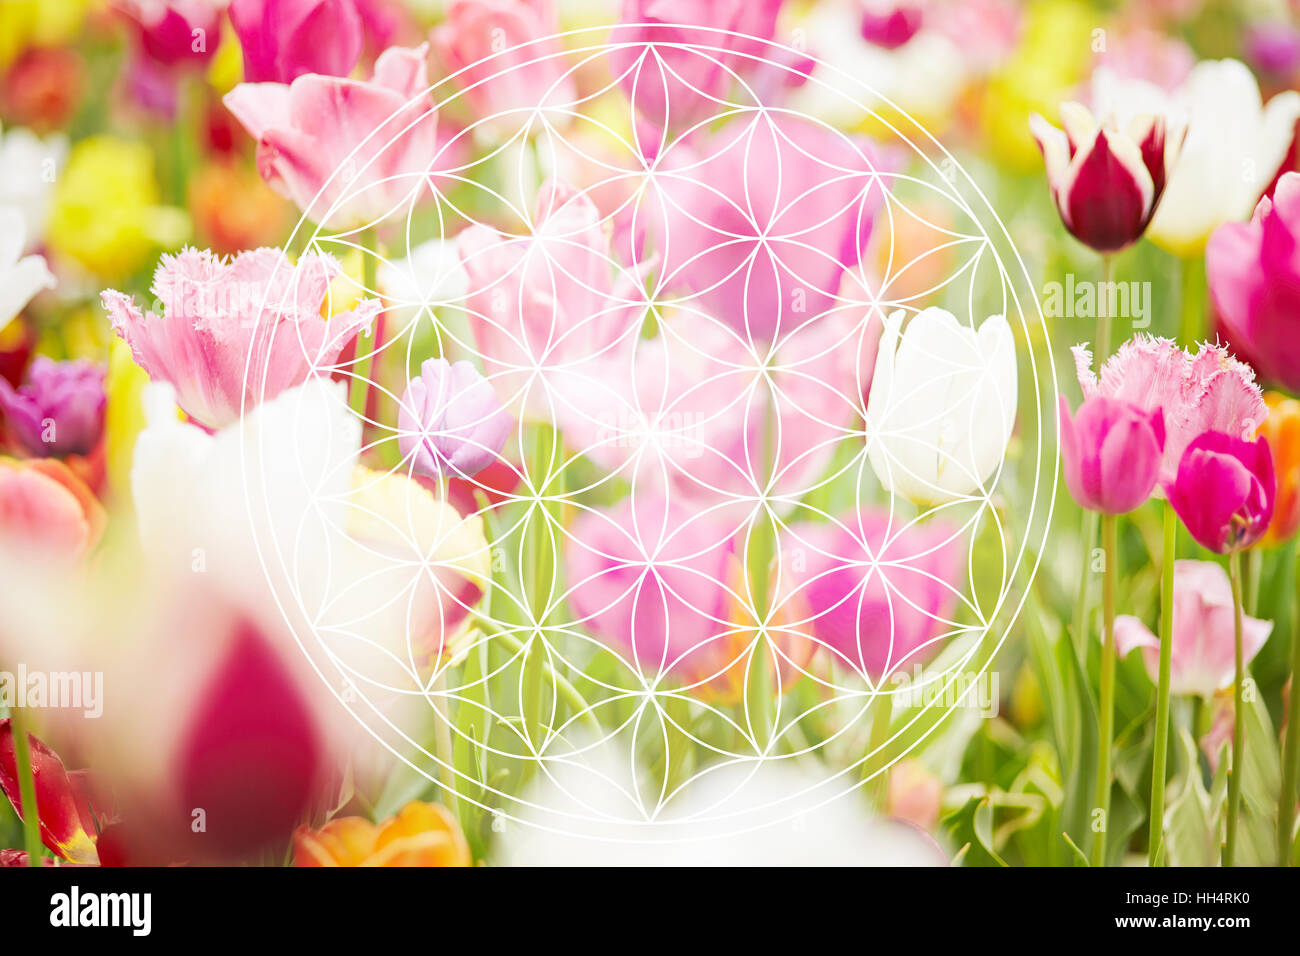 Flower of life as new age symbol on flower background Stock Photo